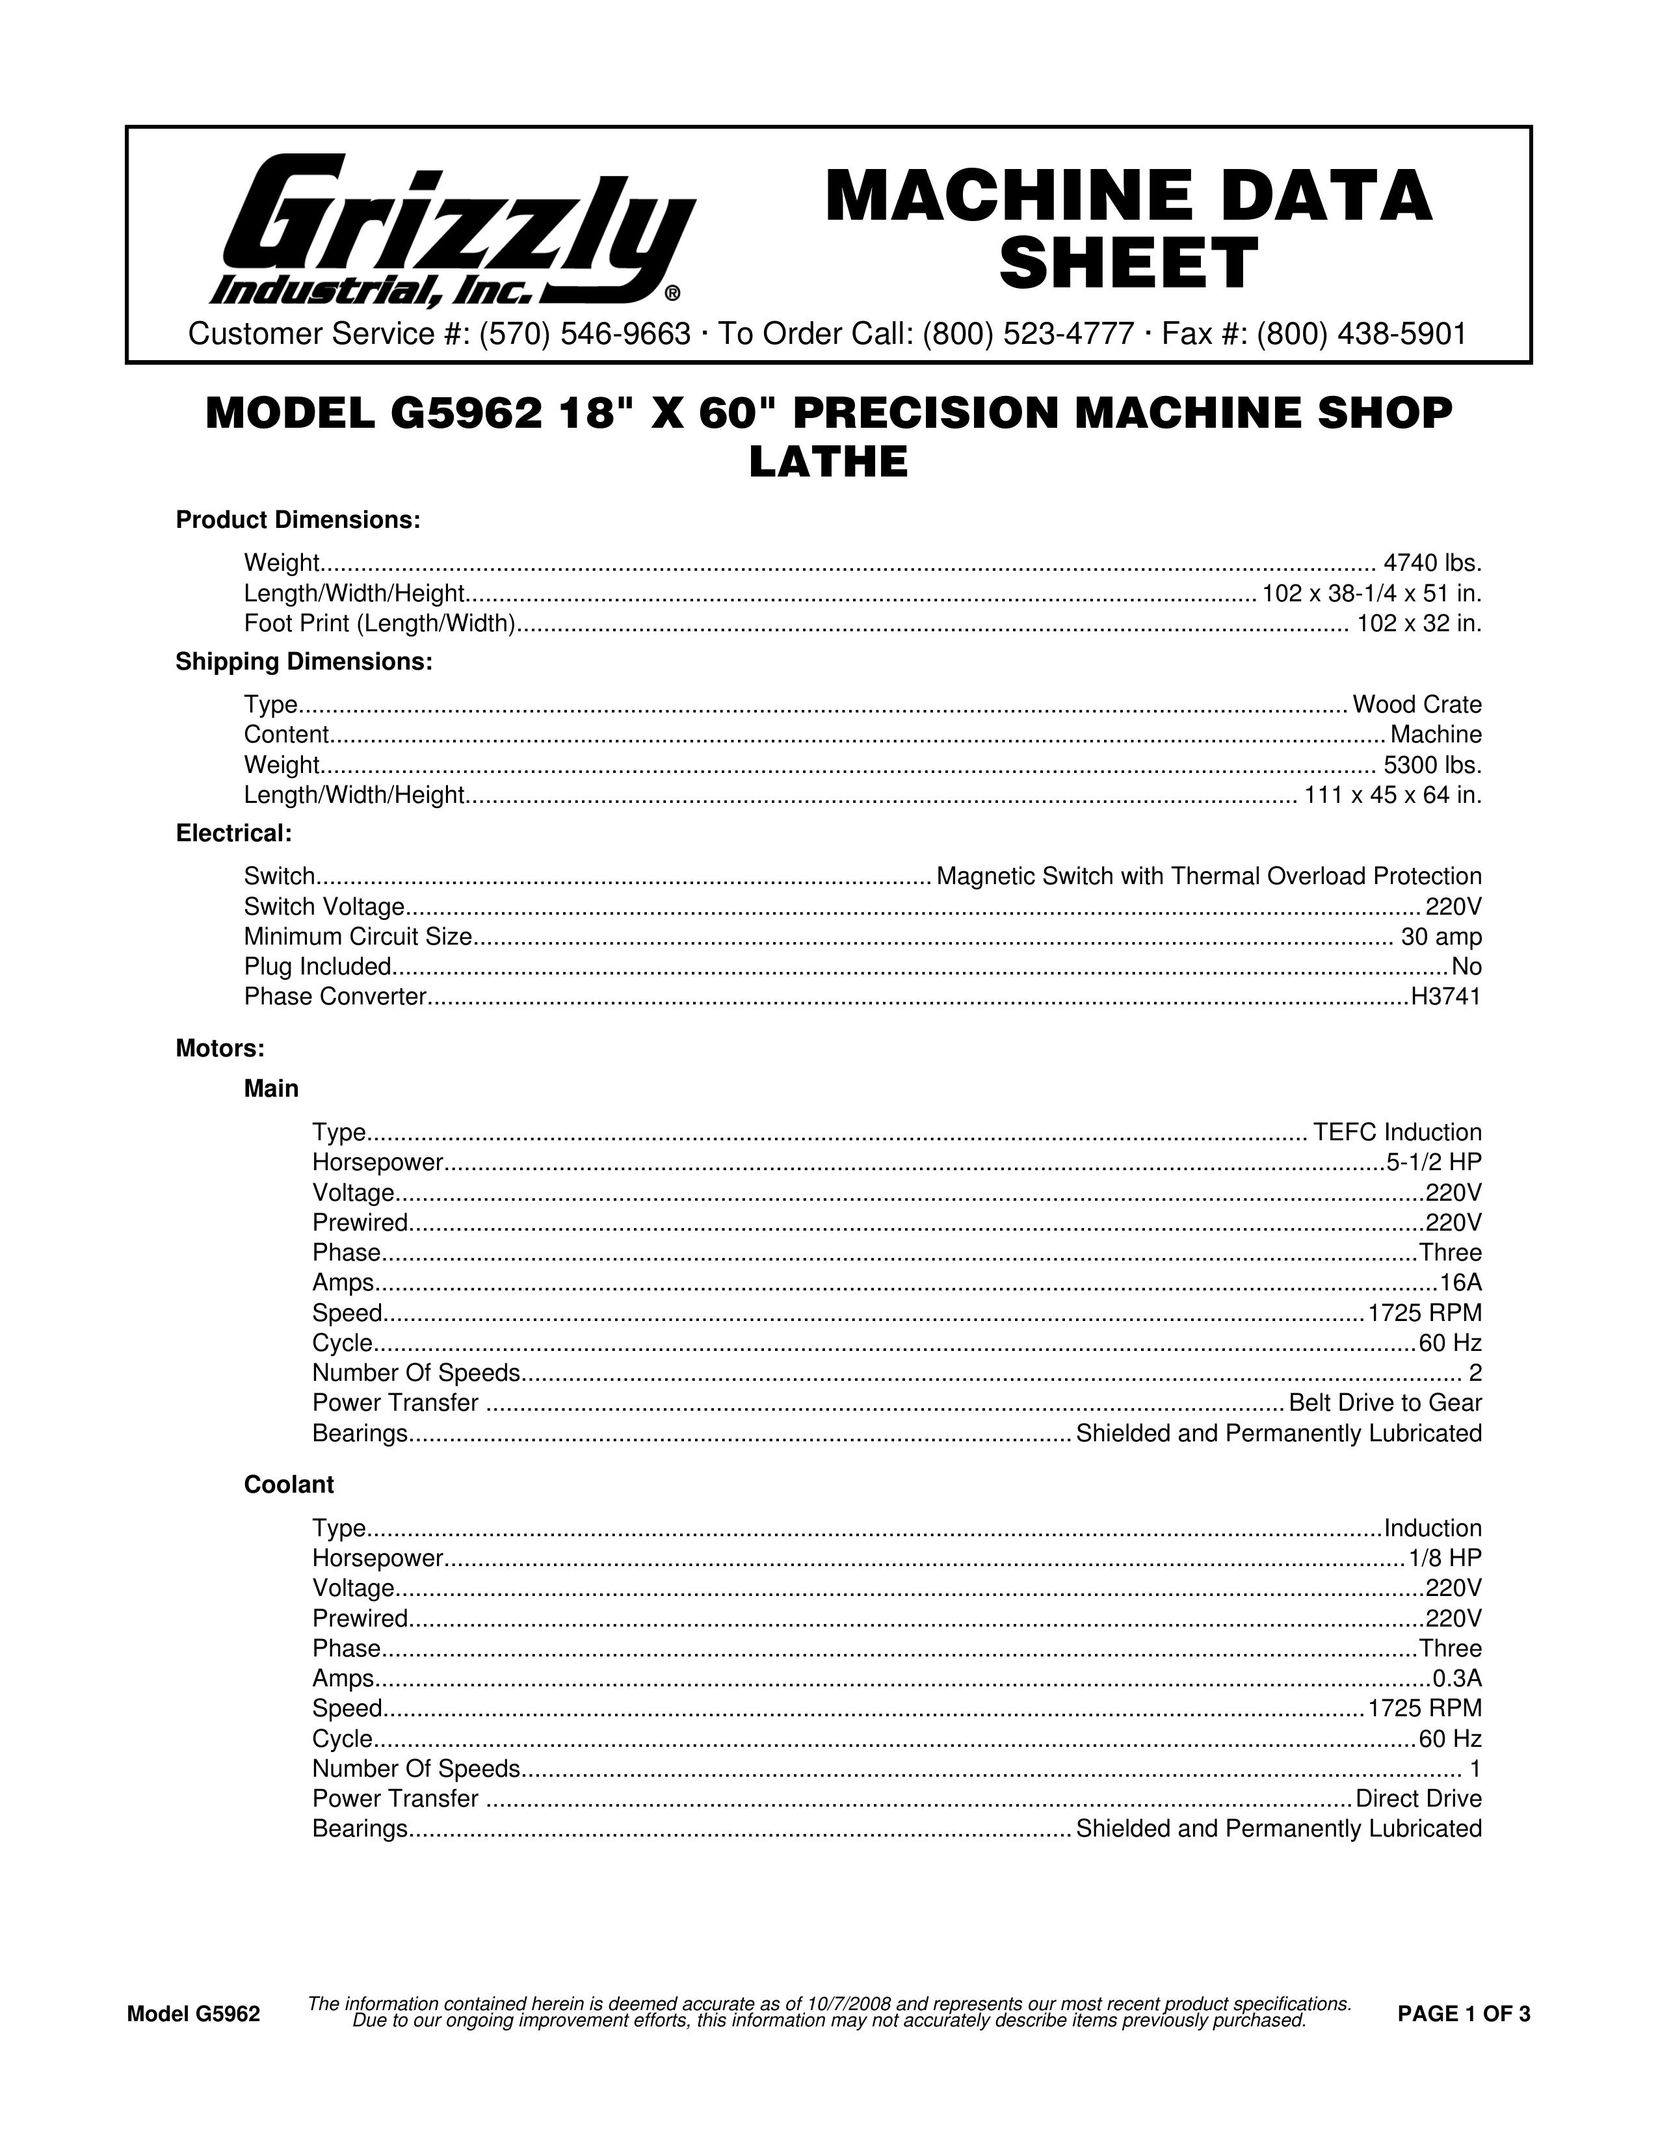 Grizzly G5962 Lathe User Manual